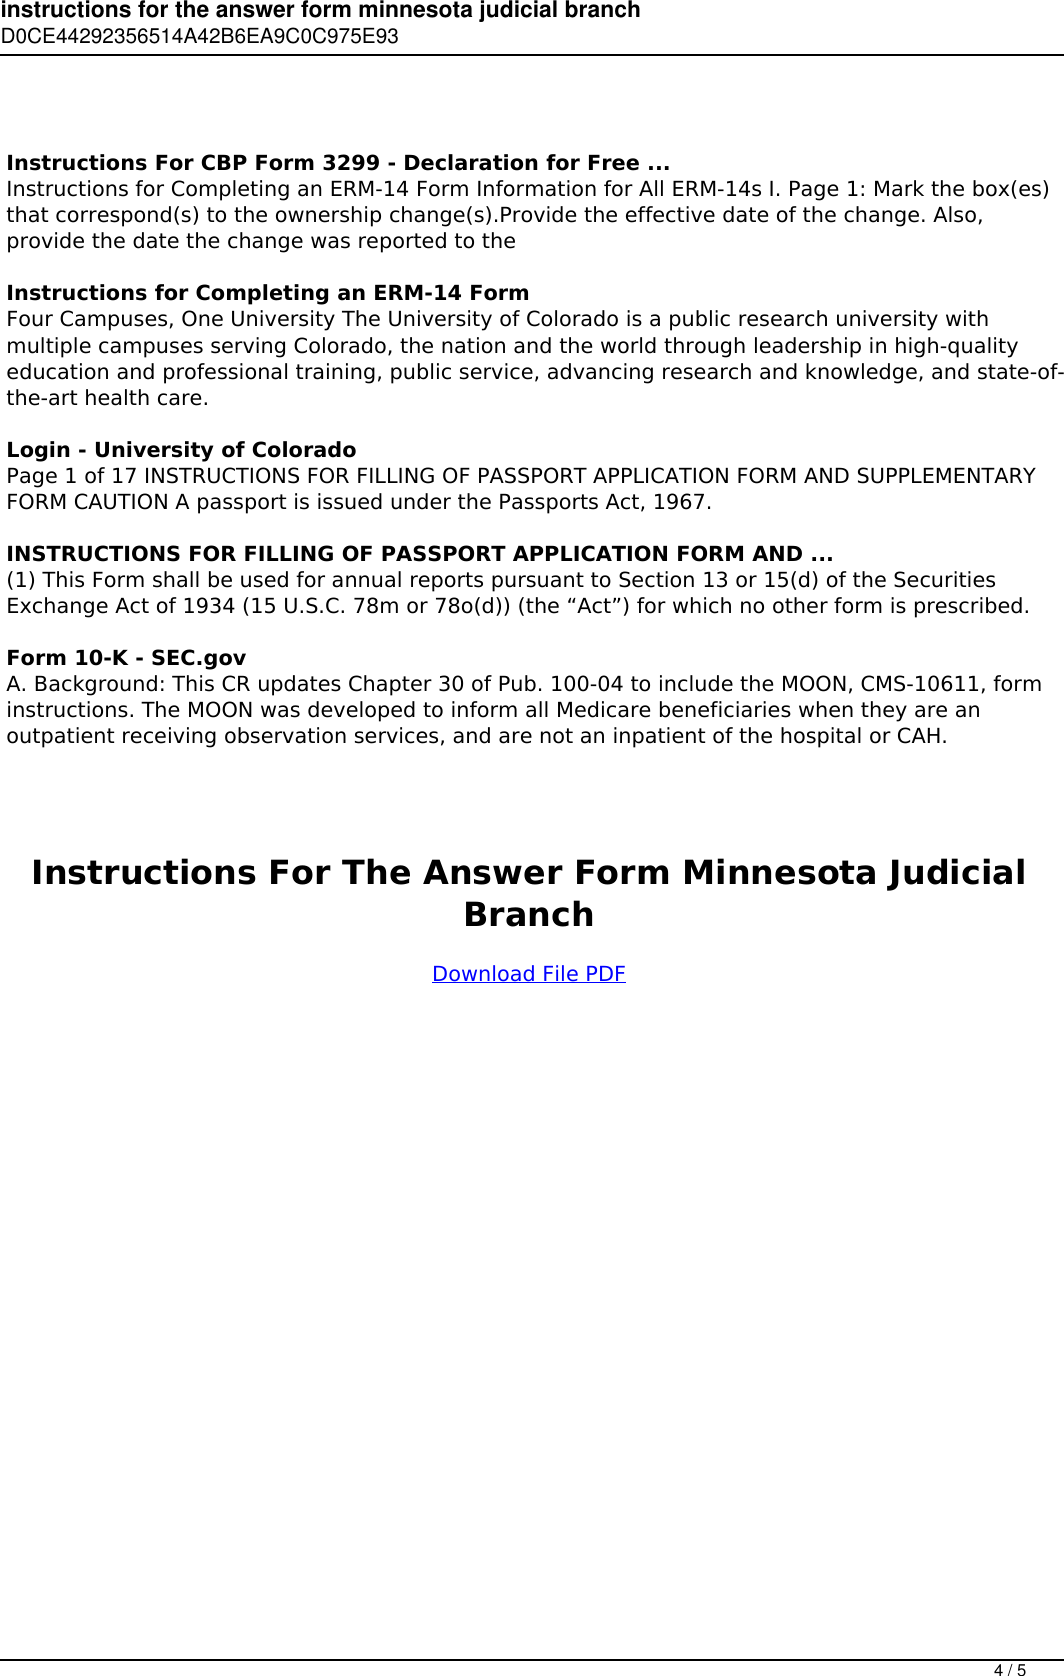 Page 4 of 5 - Instructions For The Answer Form Minnesota Judicial Branch